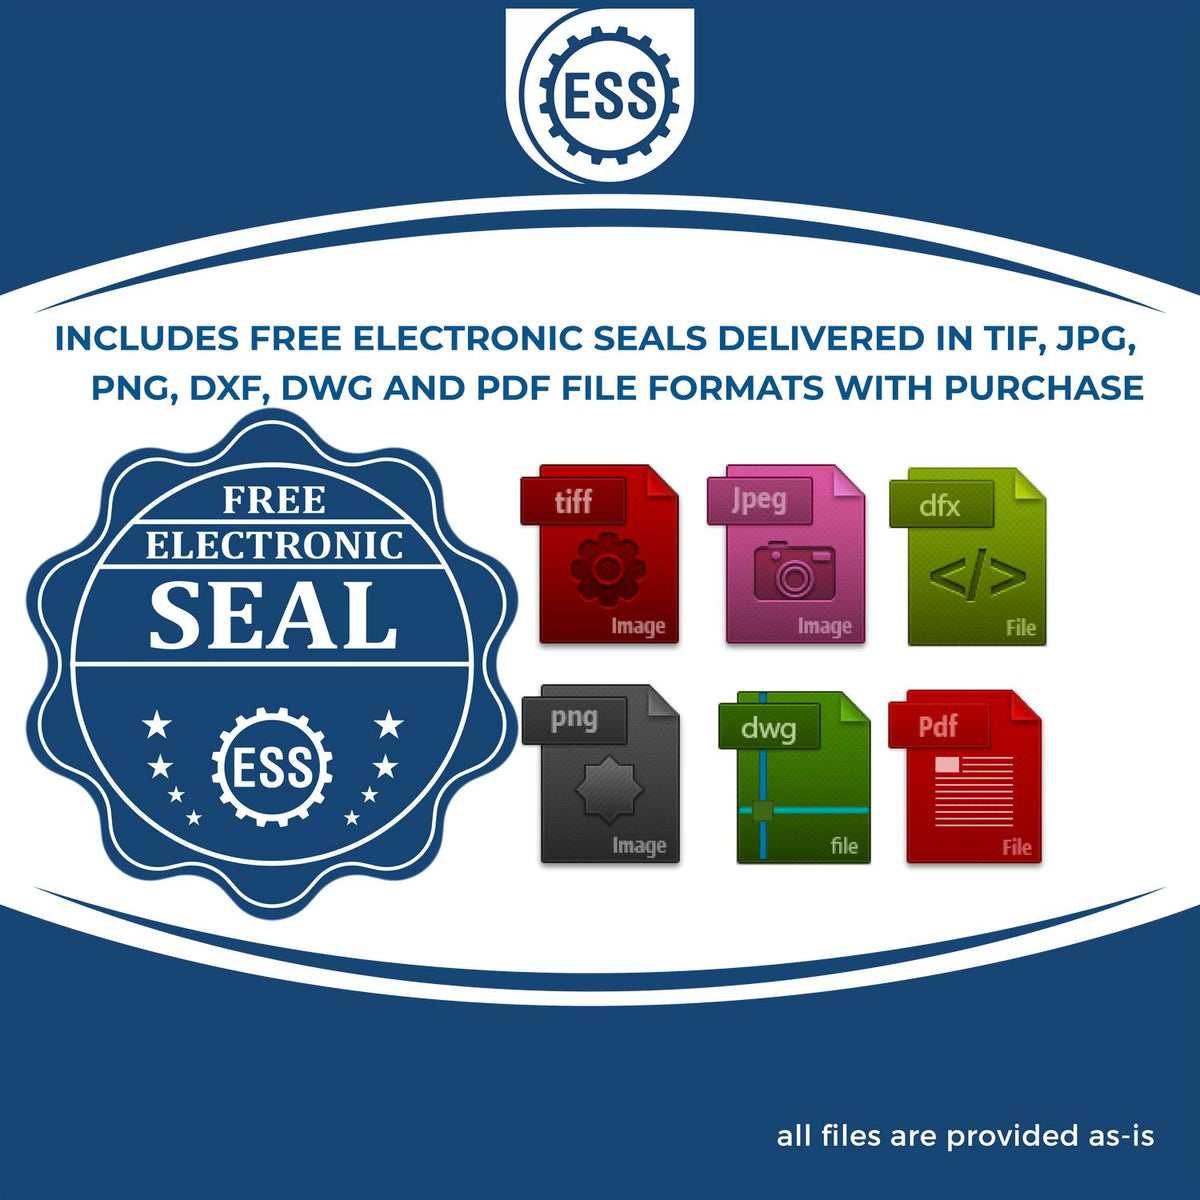 An infographic for the free electronic seal for the Ohio Geologist Desk Seal illustrating the different file type icons such as DXF, DWG, TIF, JPG and PNG.